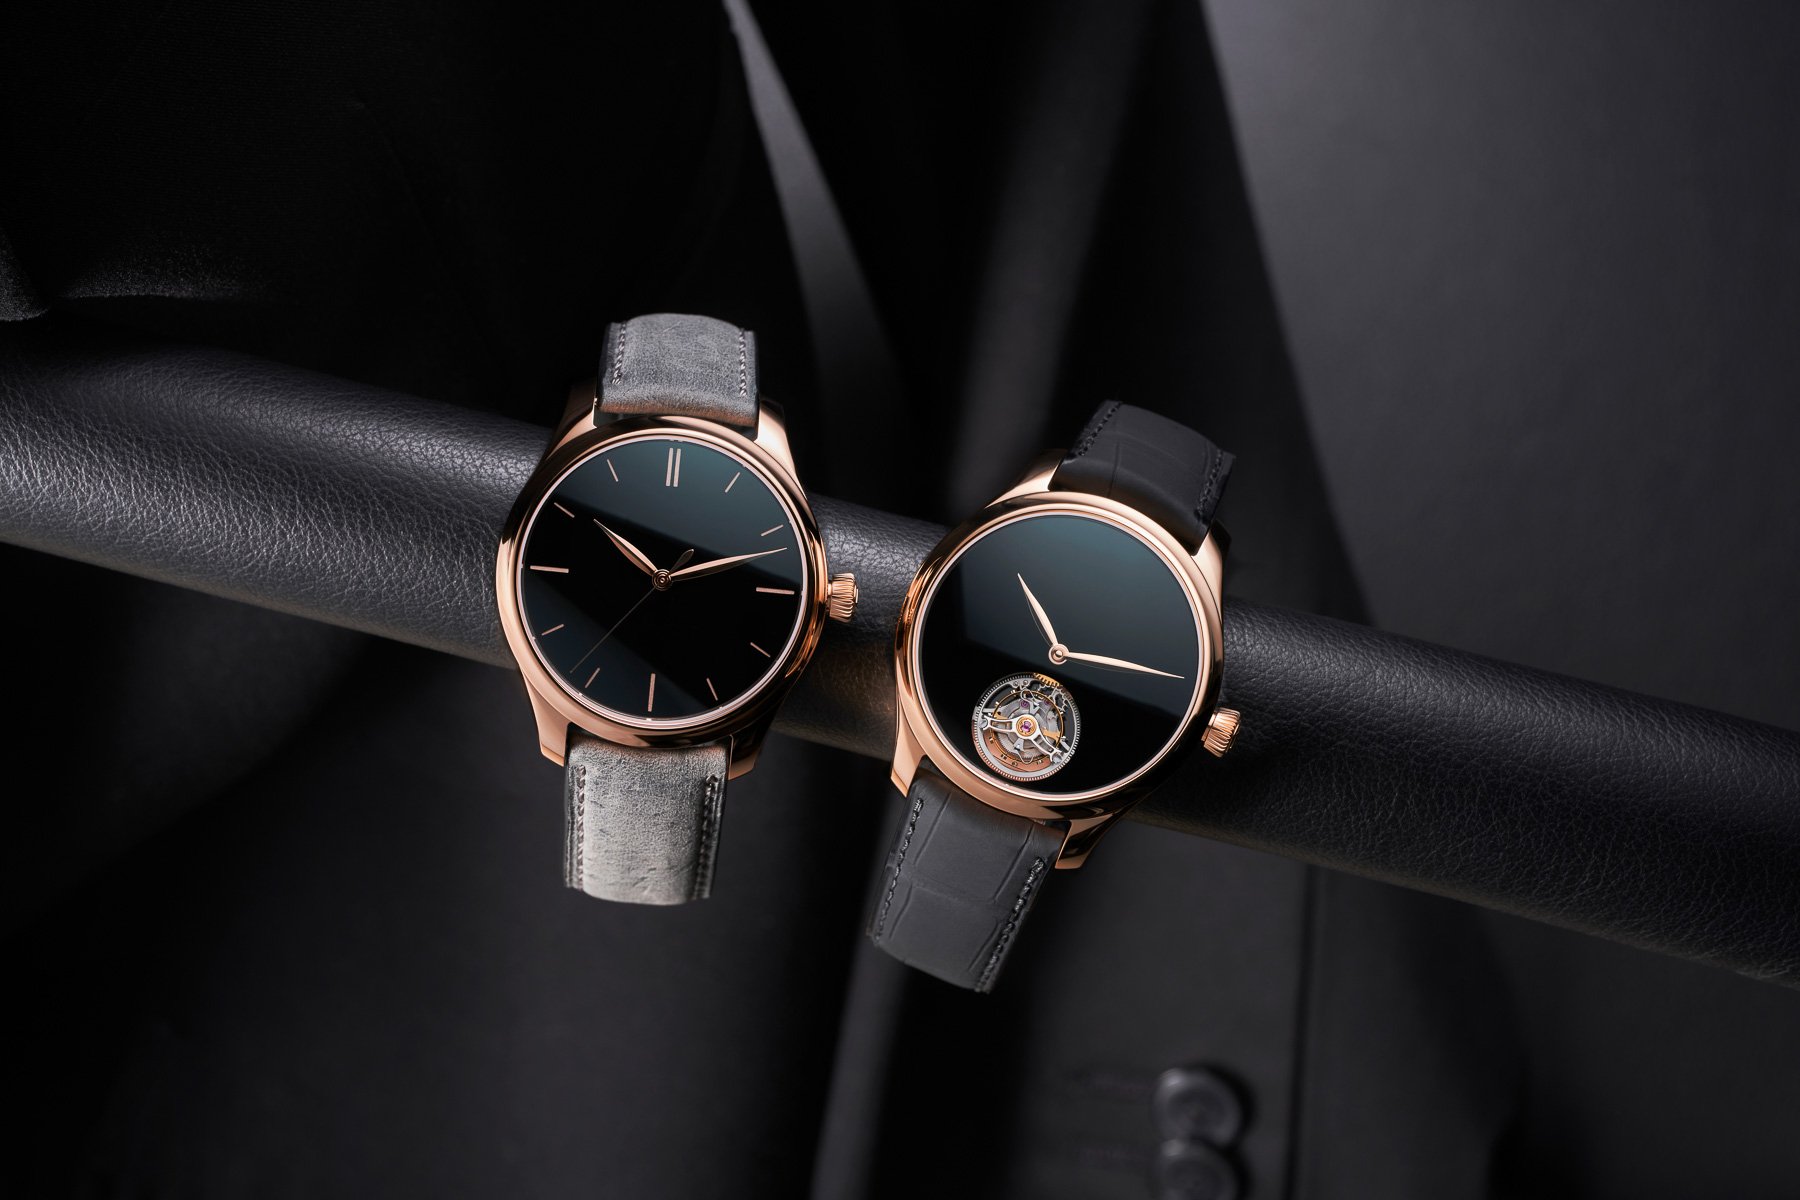 H. Moser & Cie. Unveils Two New Endeavour Vantablack Models ? The Dark Side Looks Tempting All Over Again